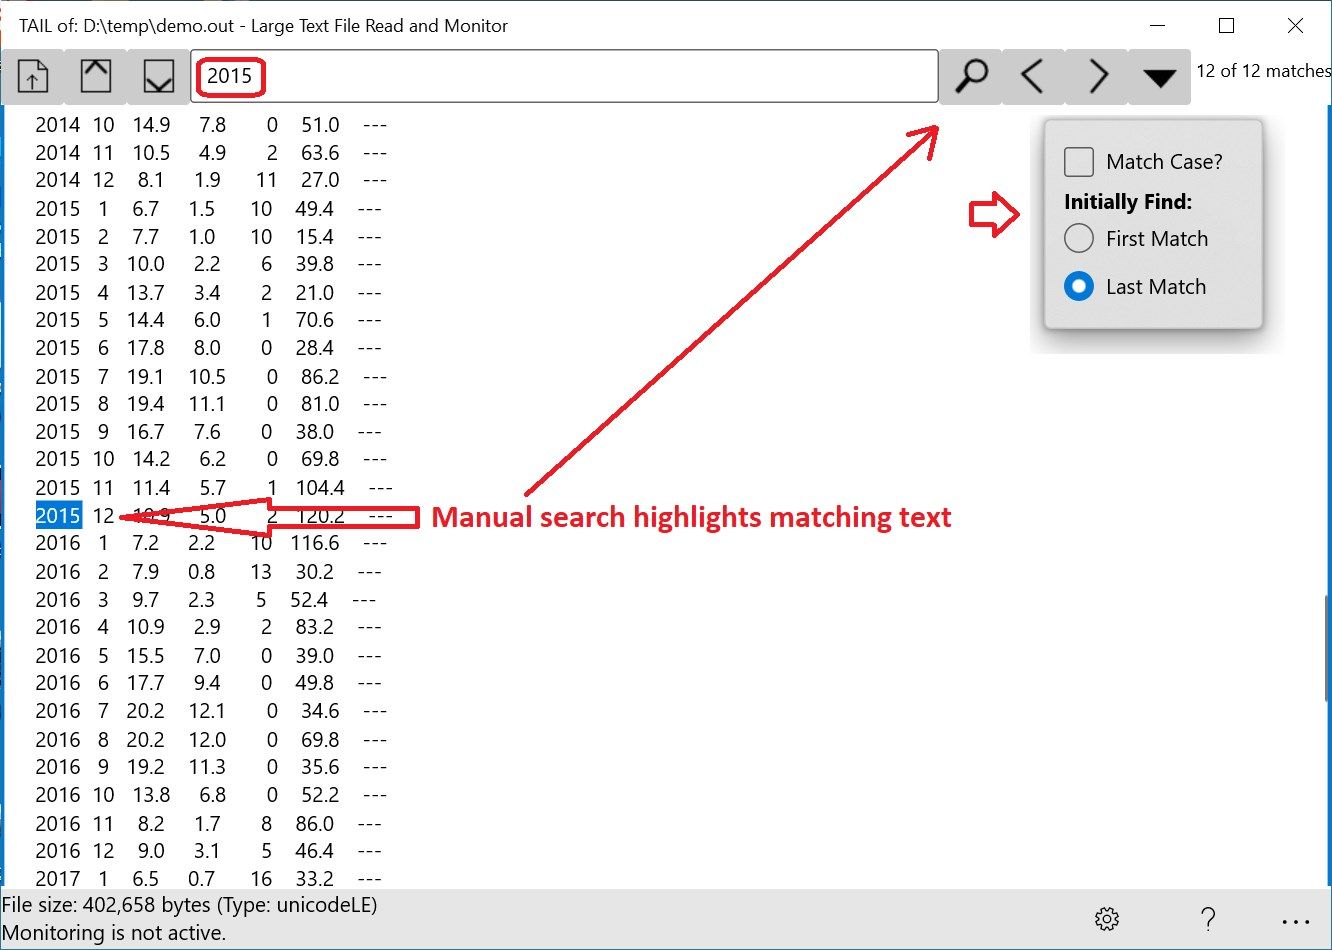 User may manually search (including next/previous buttons) for text within the head/tail of the file.